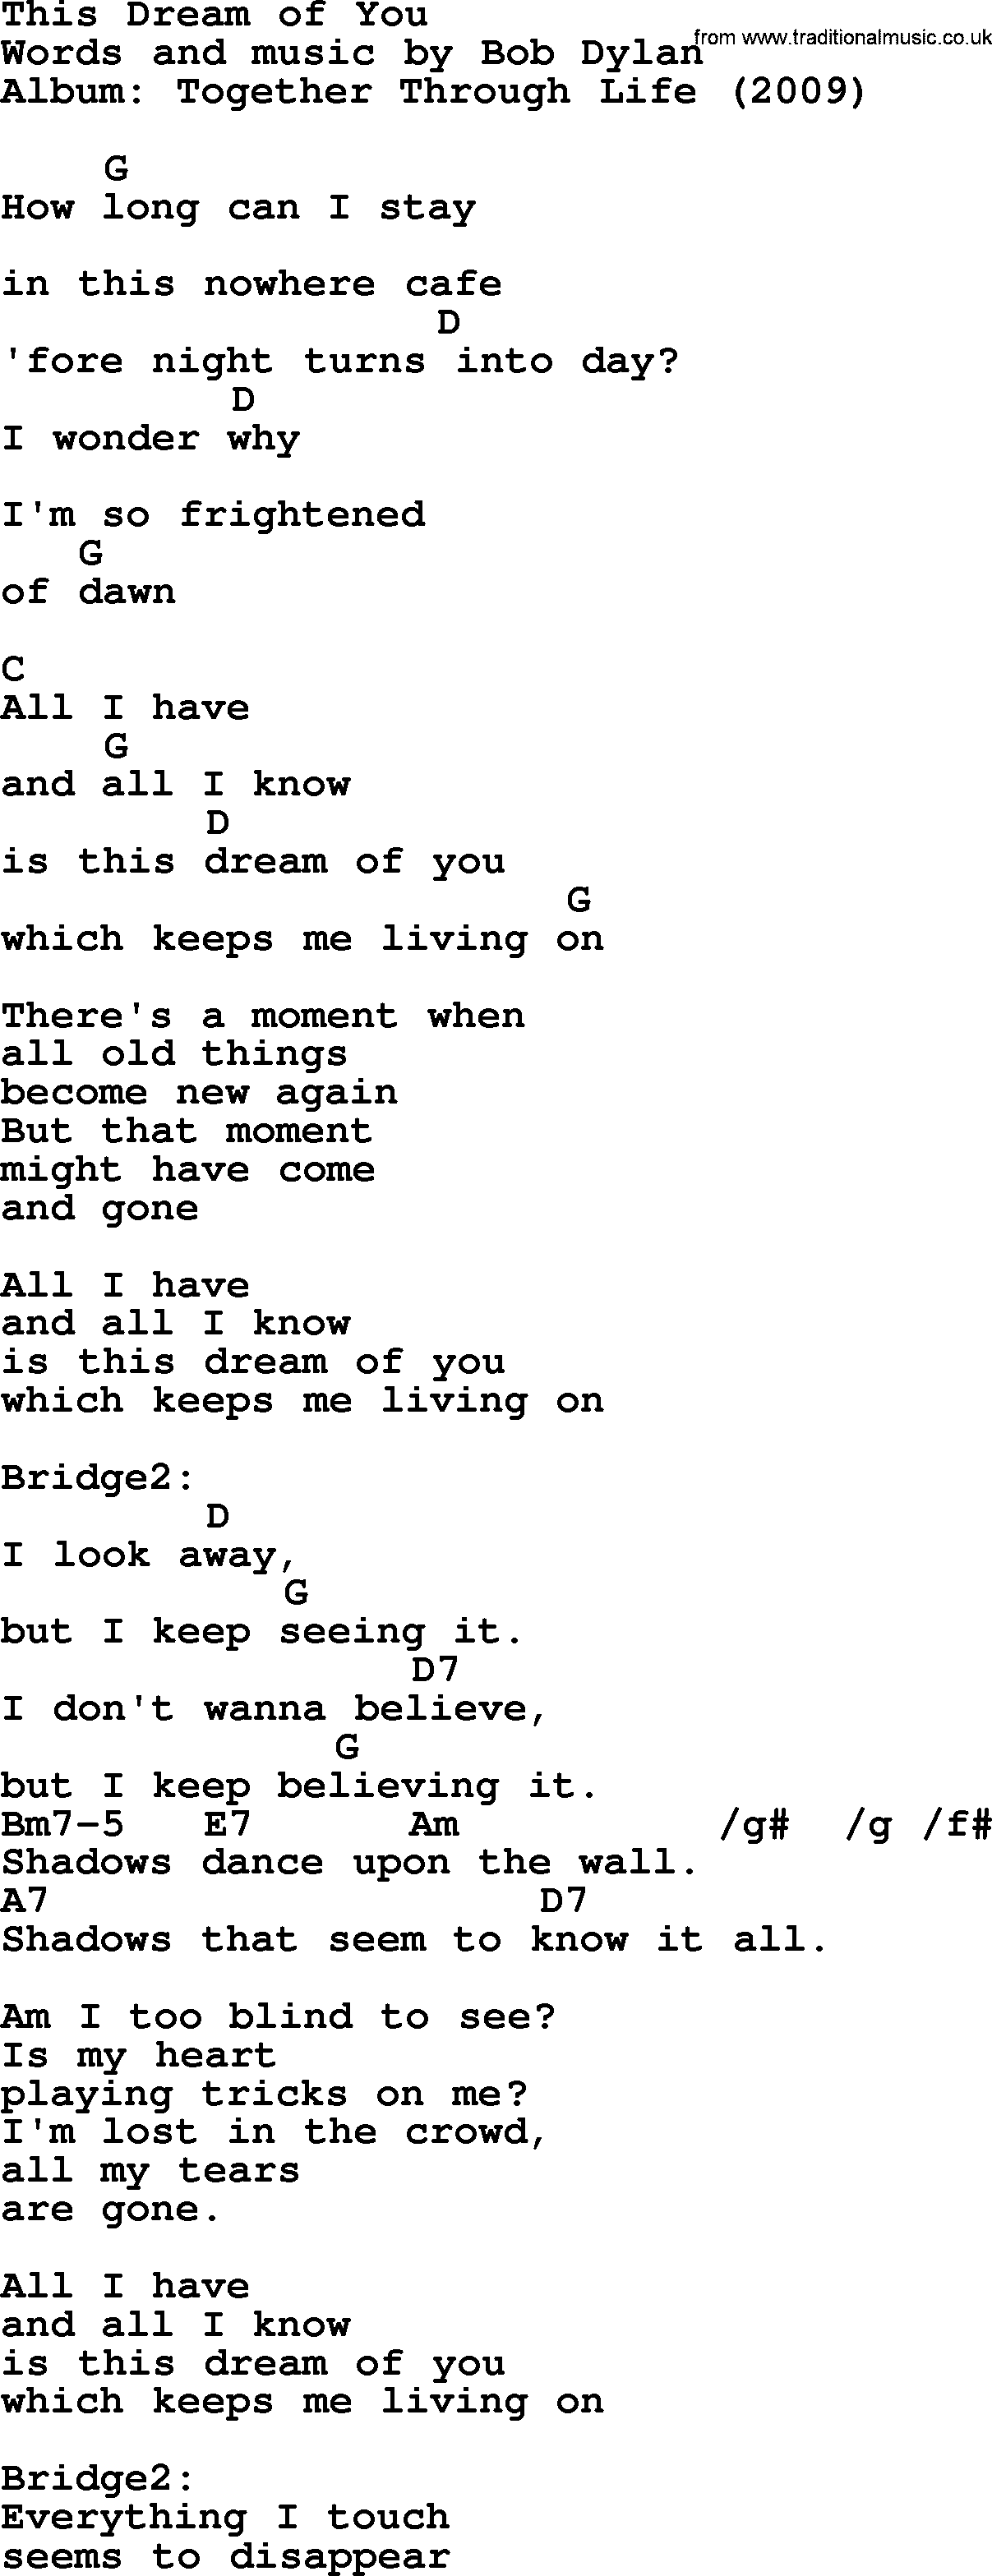 Bob Dylan song, lyrics with chords - This Dream of You